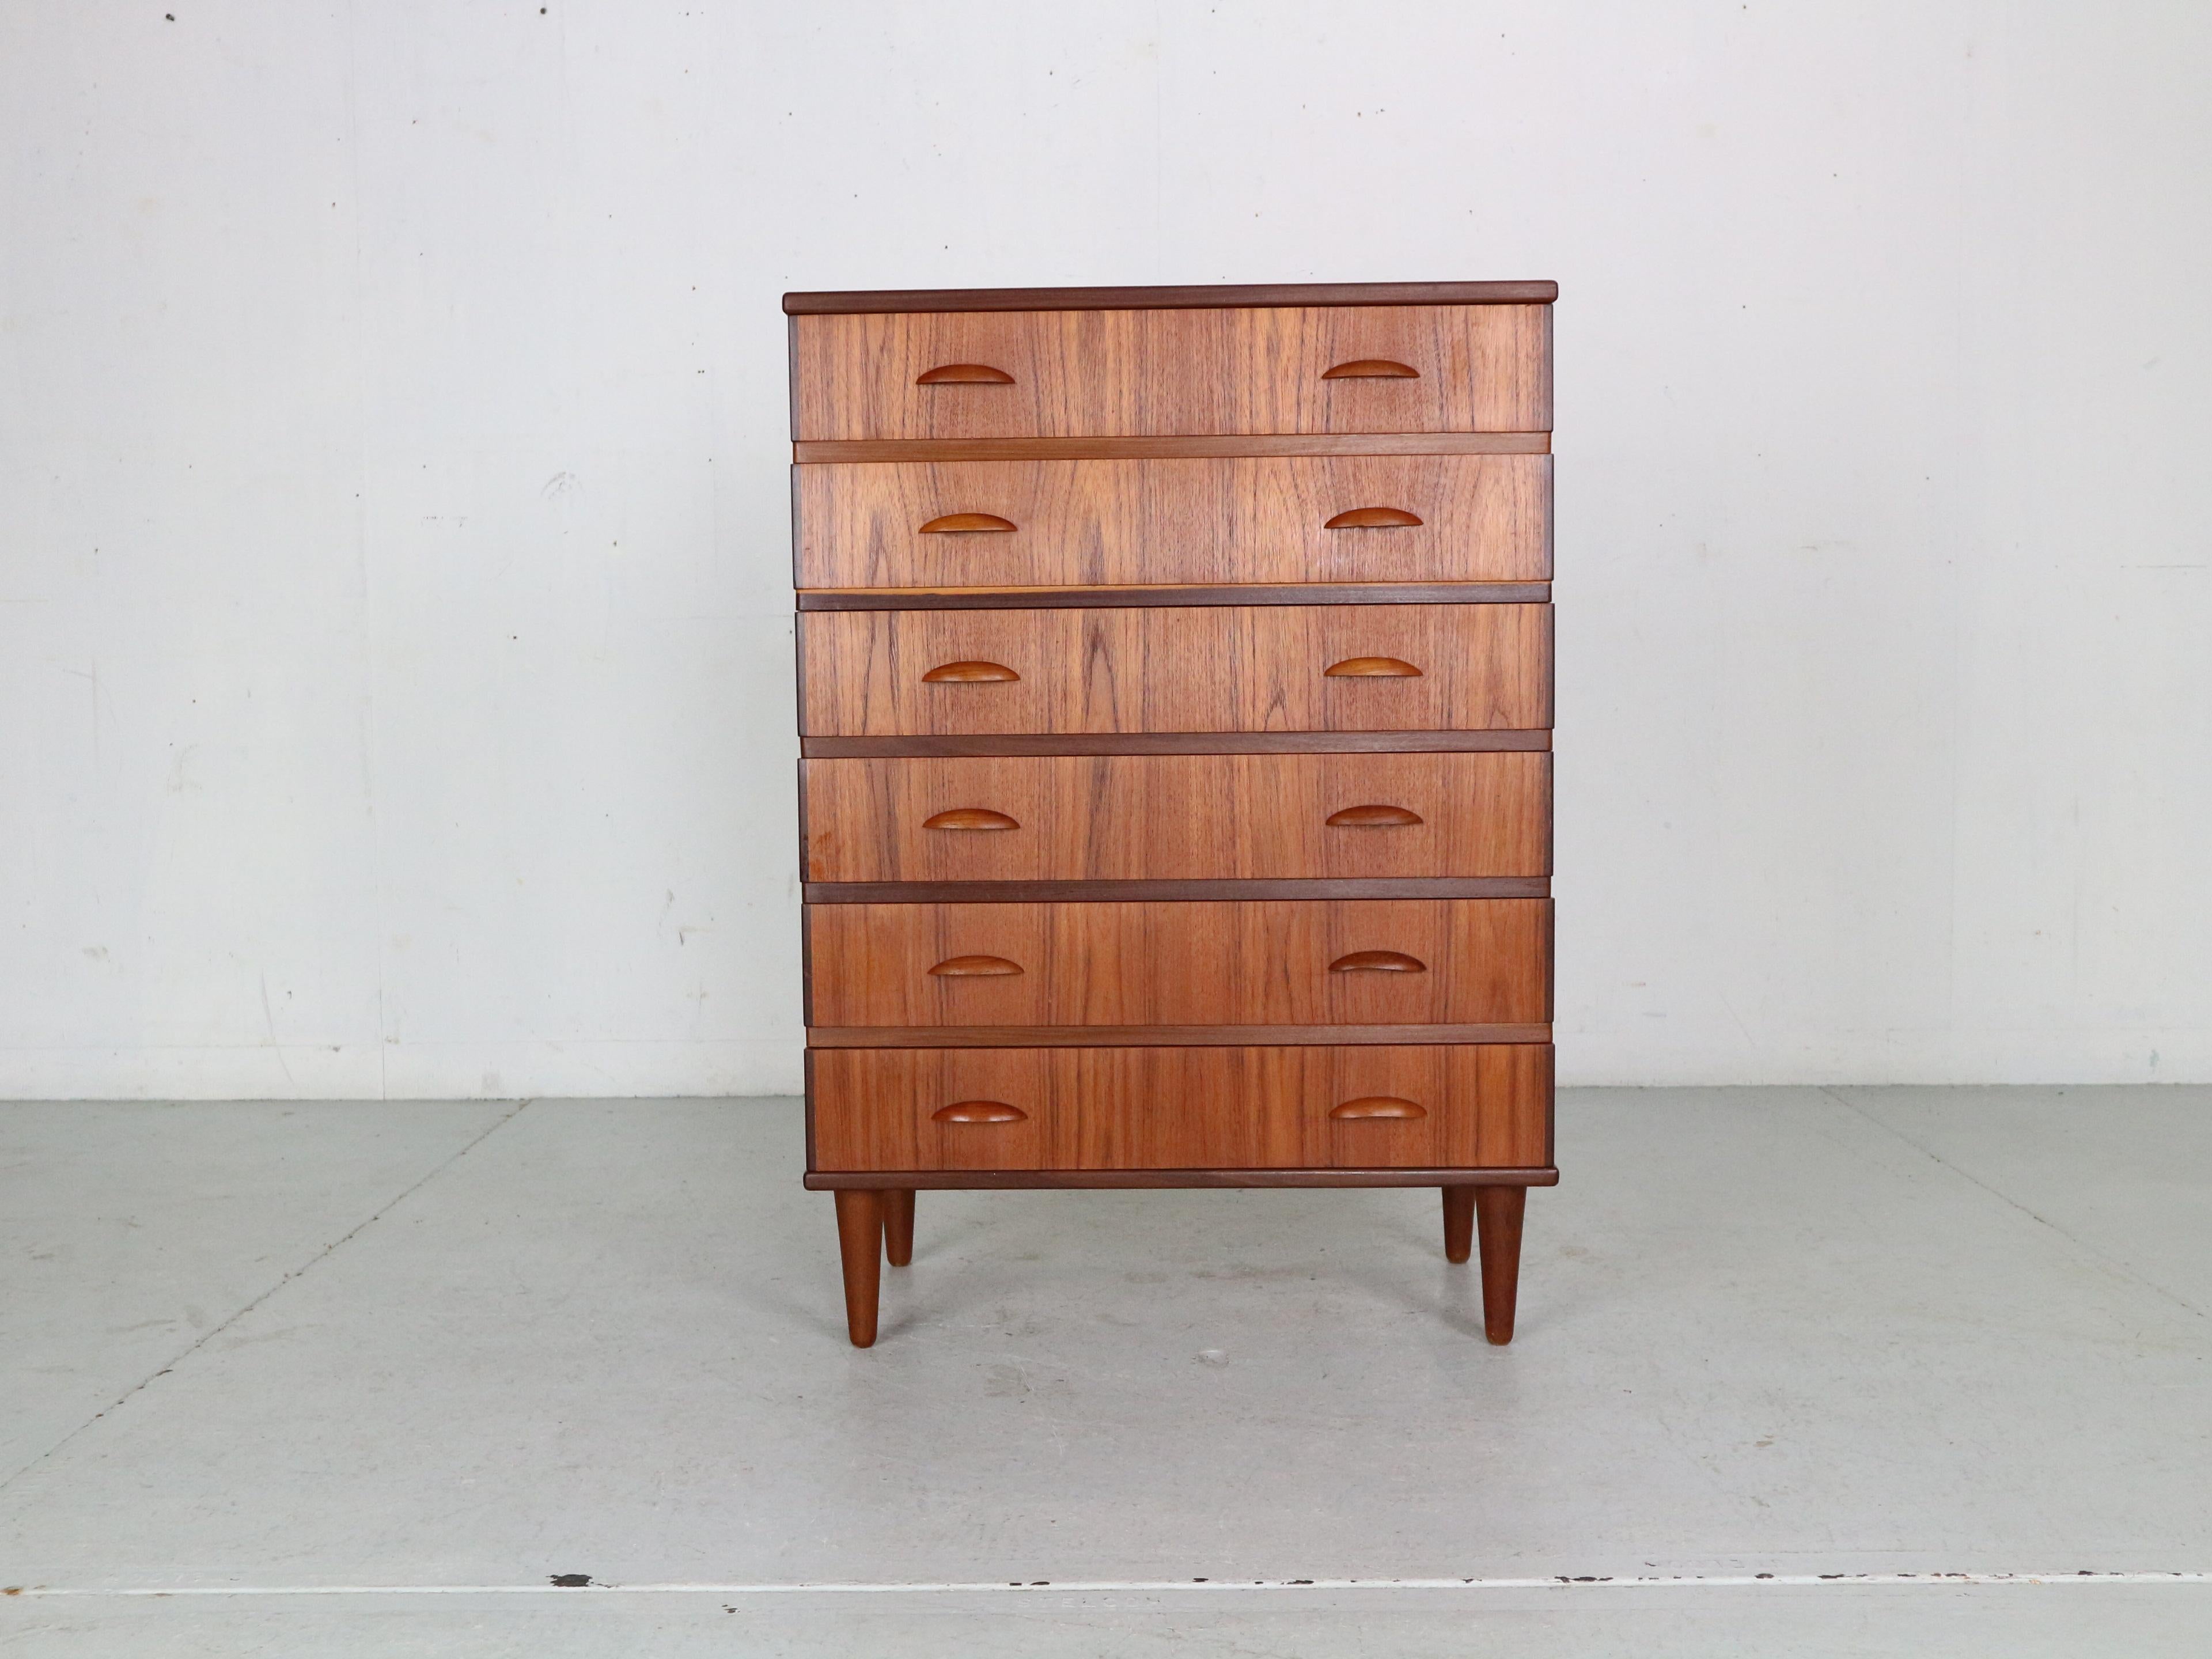 This midcentury danish design chest of 6 drawers, tallboy in teak was made in denmark in the 1960s period. Beautiful minimalistic handles of both sides of the drawers. Curved shape cabinet is an elegant storage space for your vintage and modern